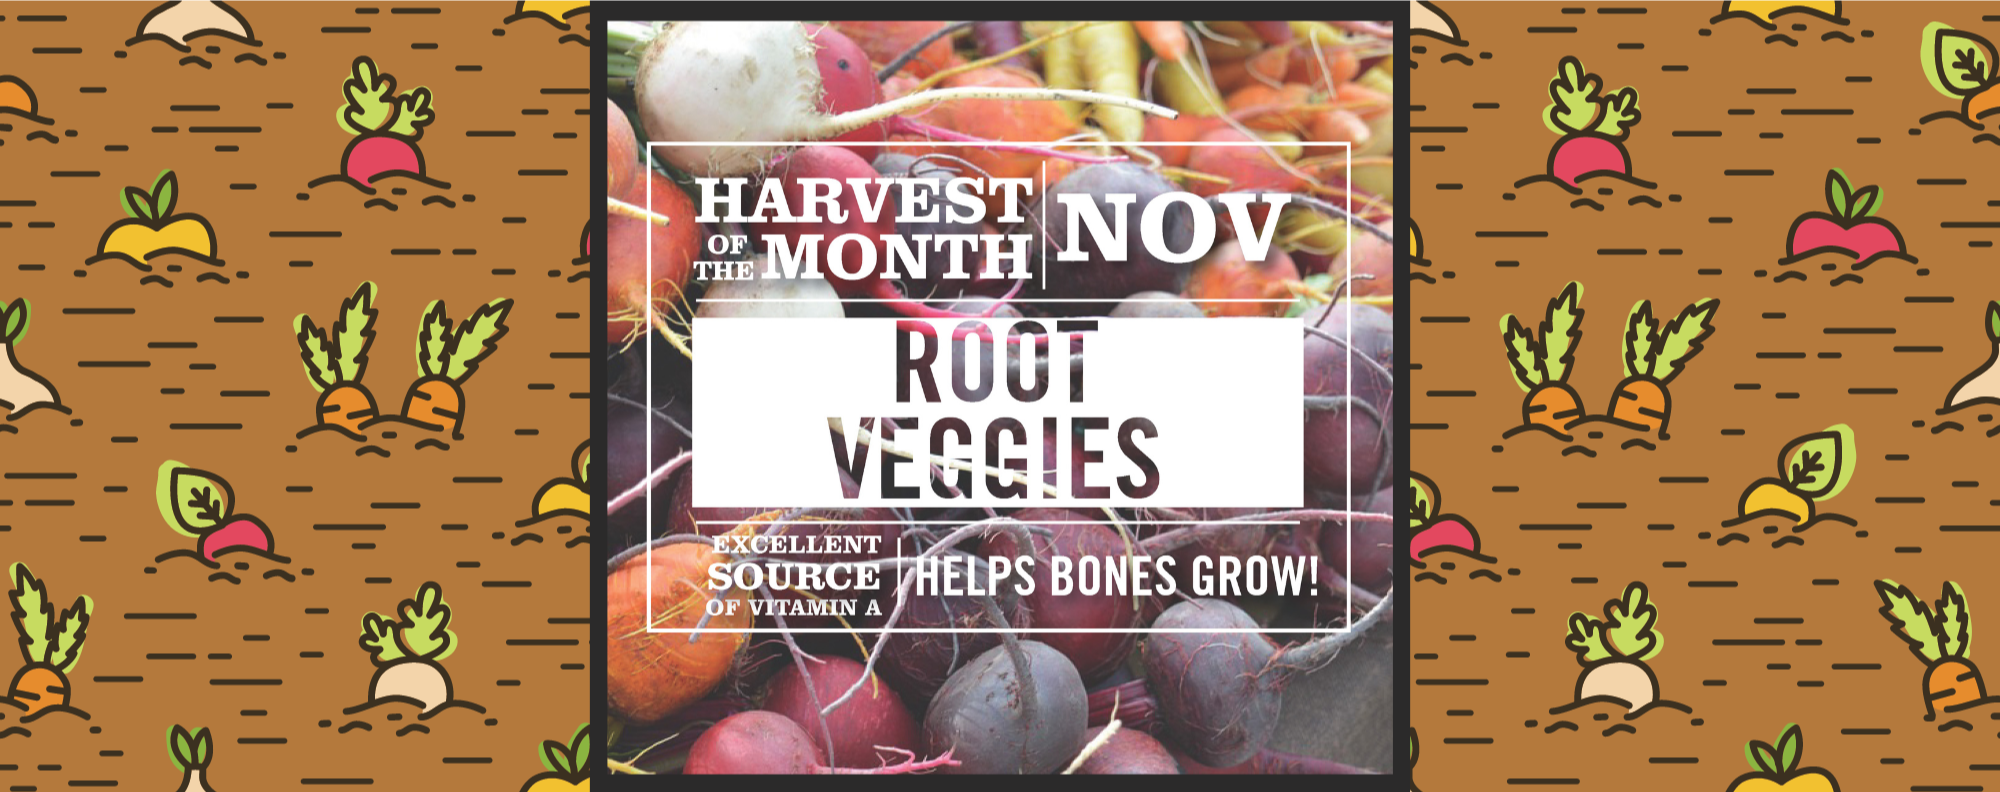 Harvest of the Month, root vegetables growing in the ground